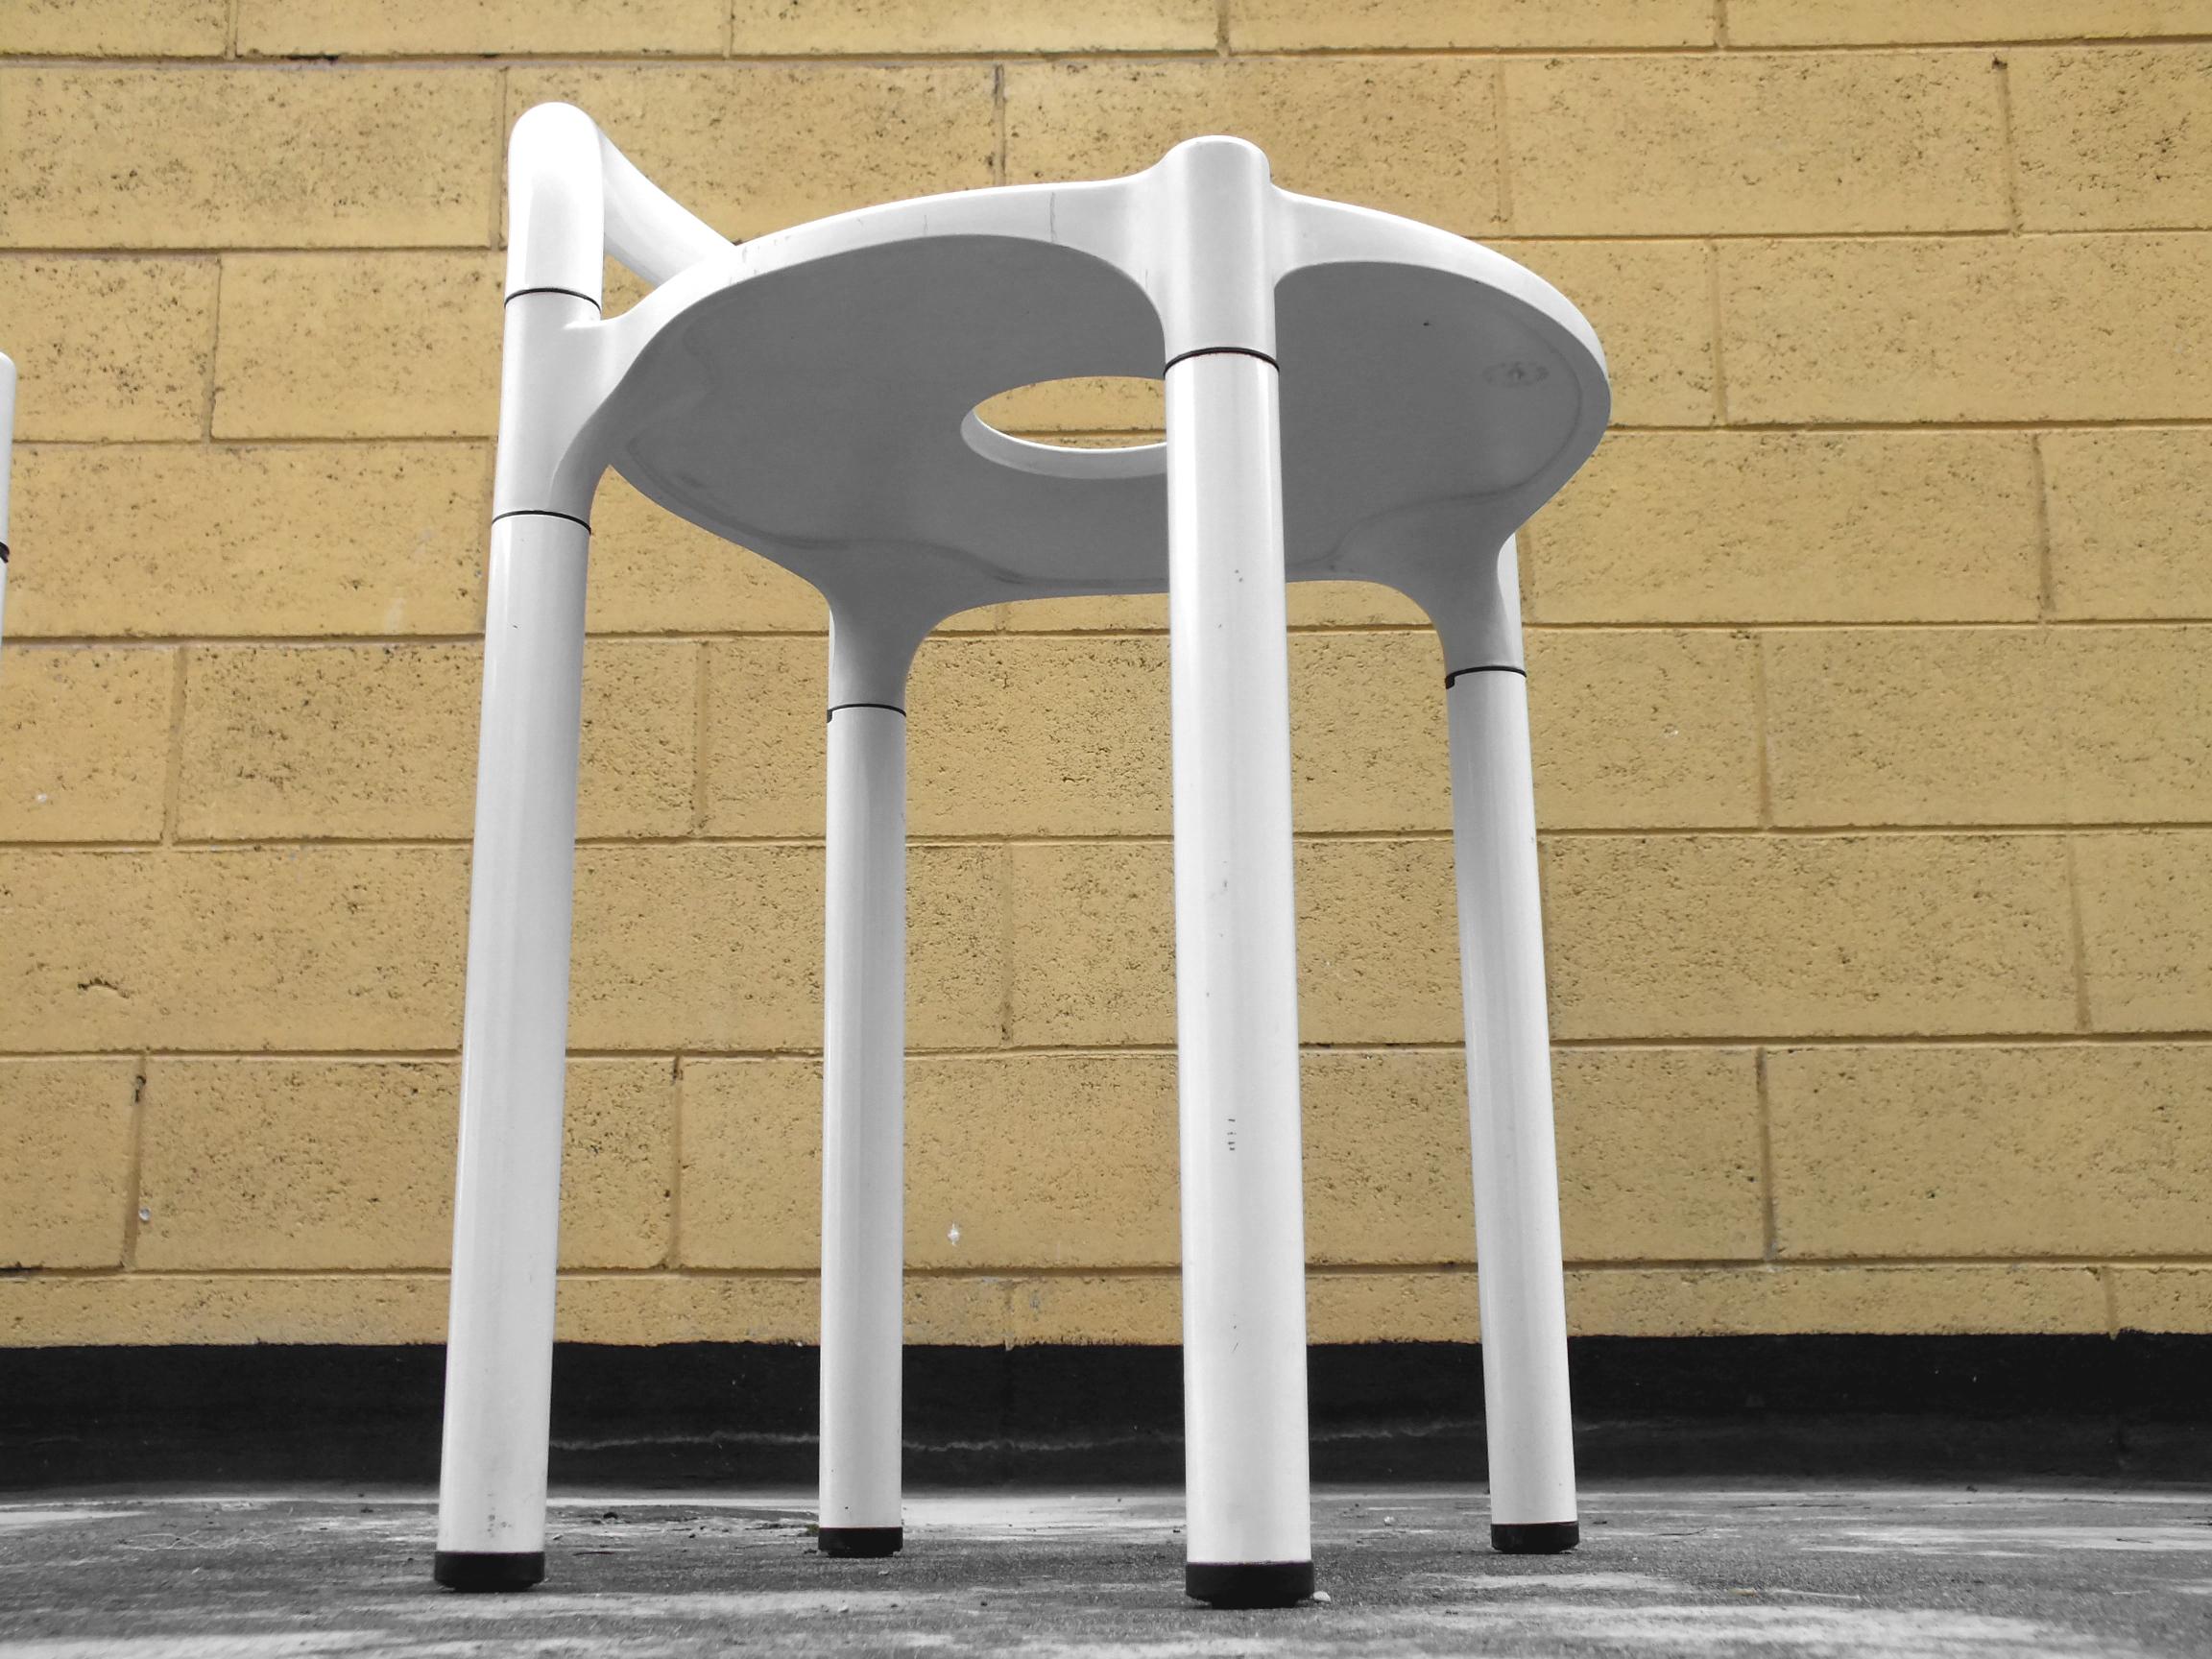 Metal Anna Castelli Ferrieri Design in Years '80 for Kartell Set of Two Stools 